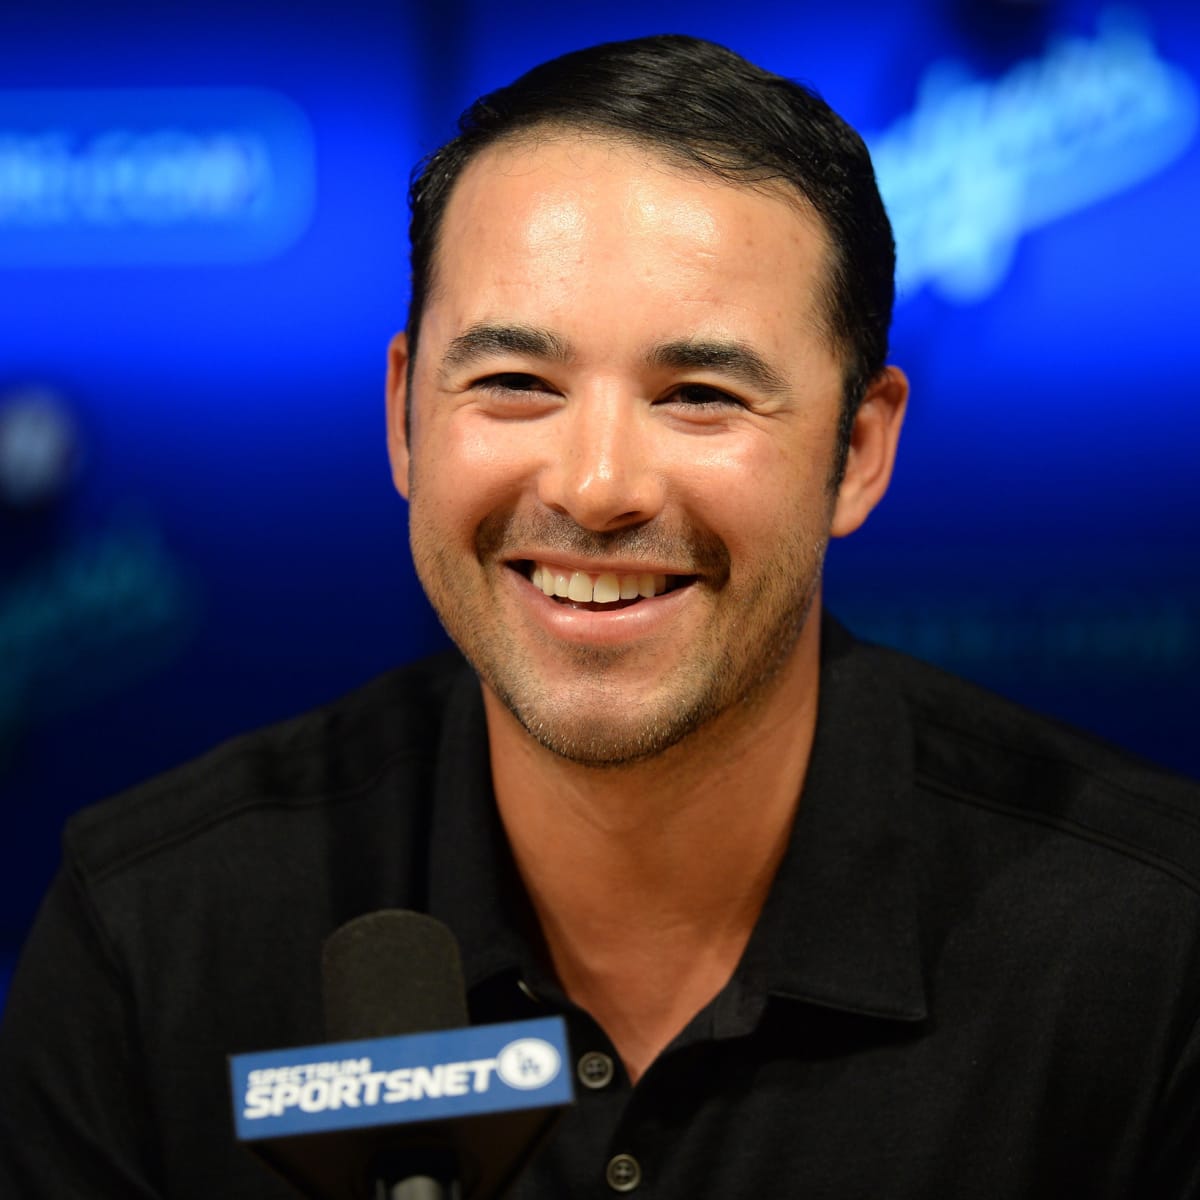 Dodgers outfielder Andre Ethier player profile – Orange County Register